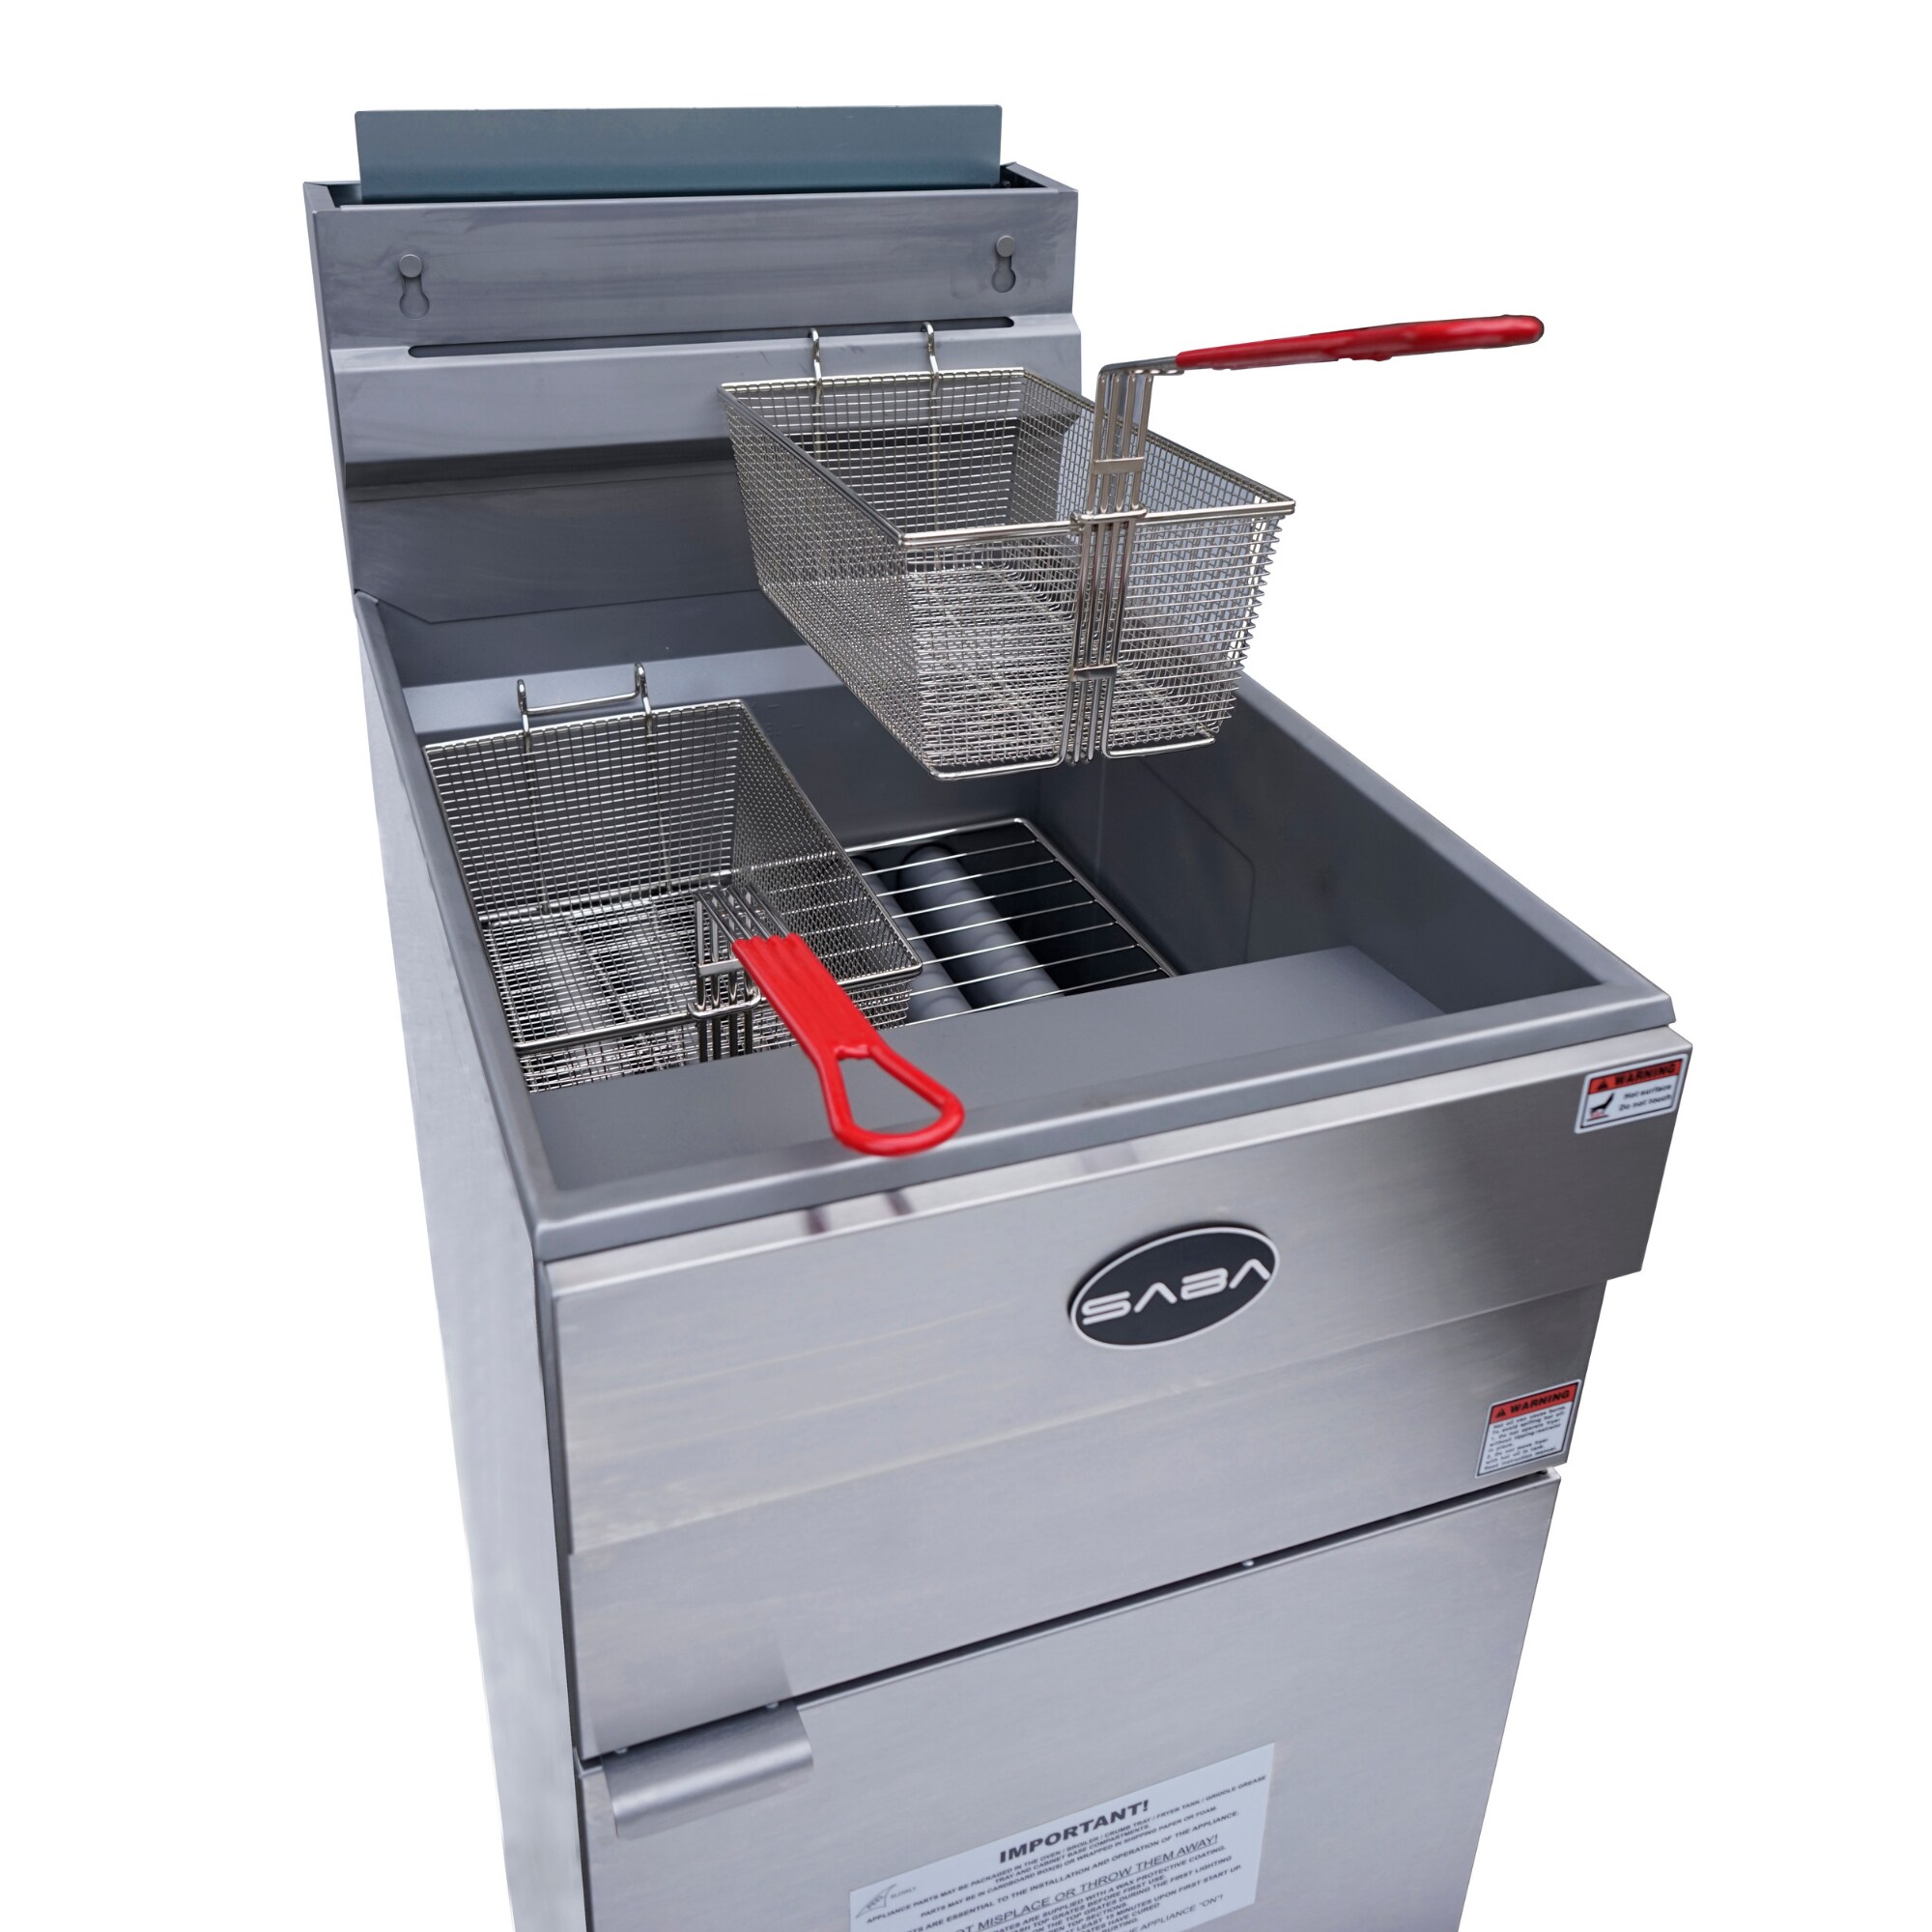 Commercial Deep Fryers at